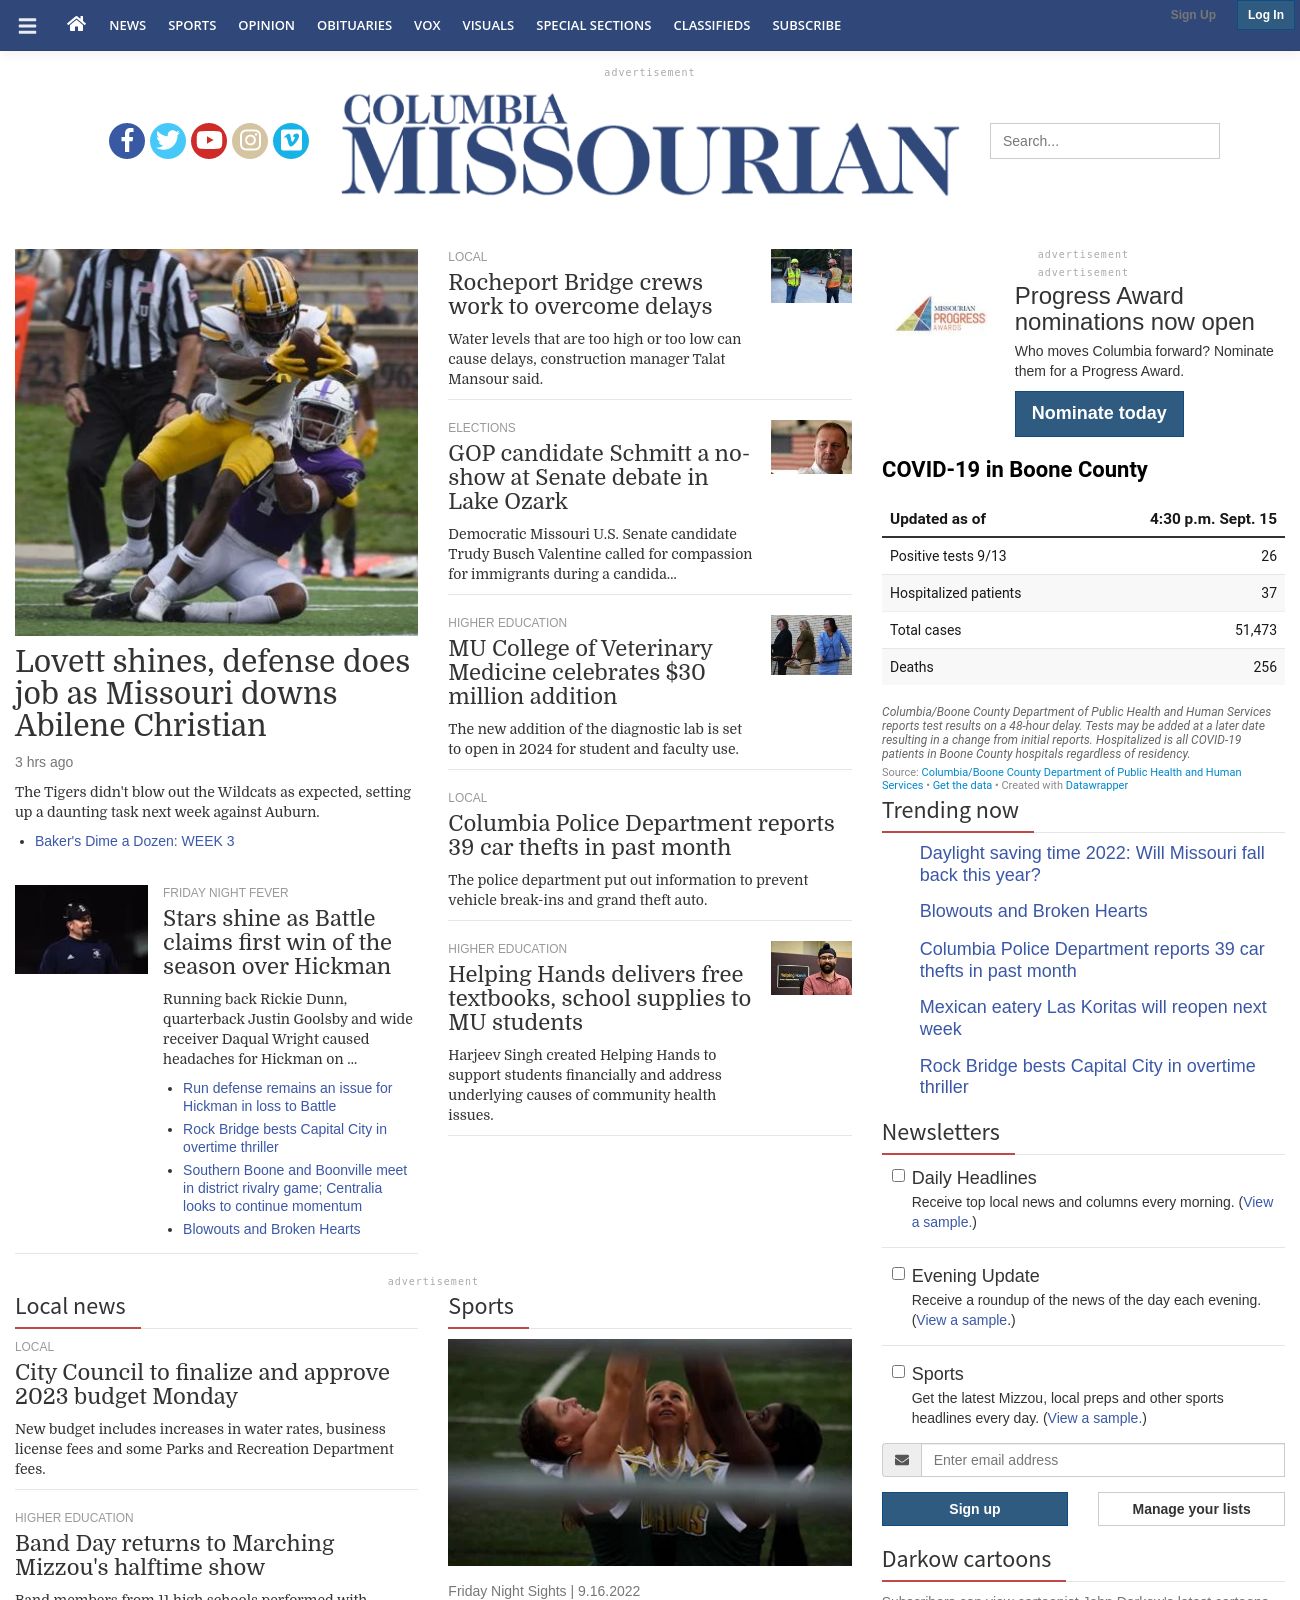 Columbia Missourian at 2022-09-17 17:57:10-05:00 local time